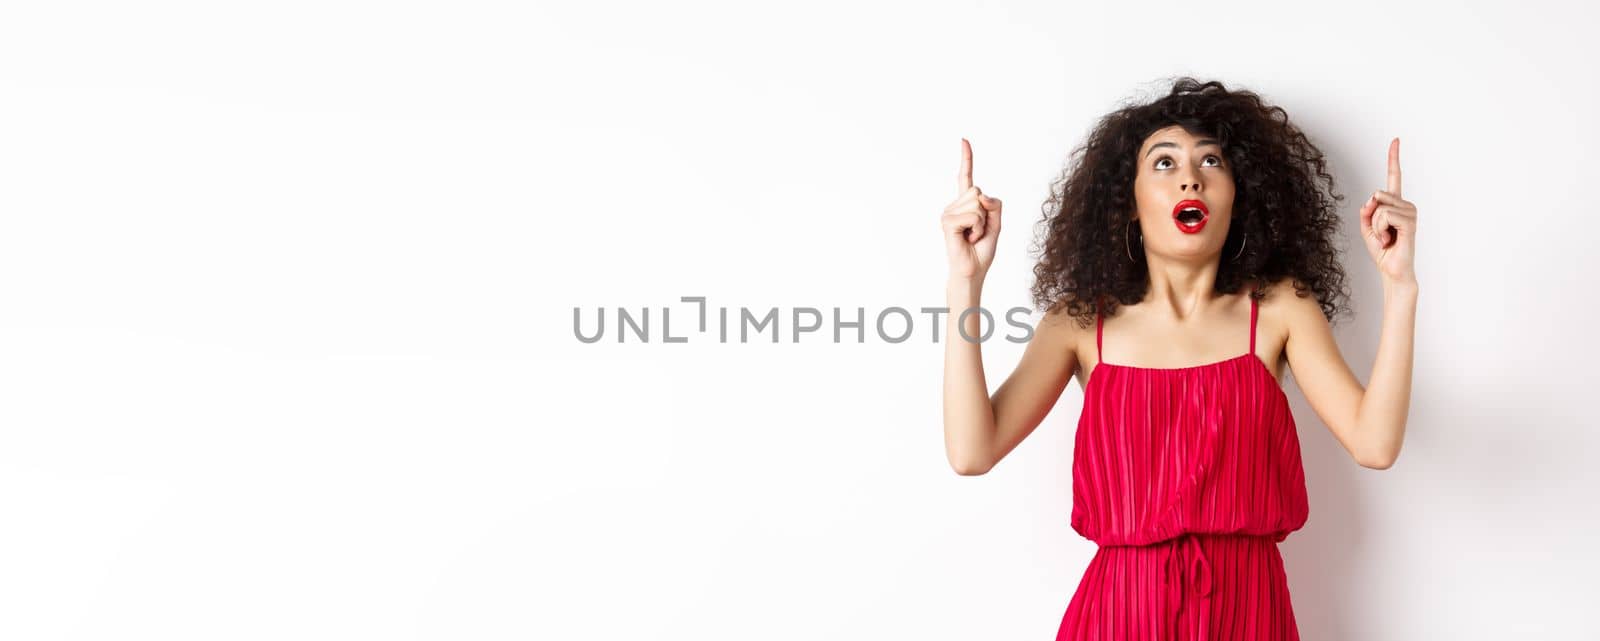 Amazed girl with evening makeup and curly hair, looking and pointing up excited, showing advertisement, standing in red dress on white background.